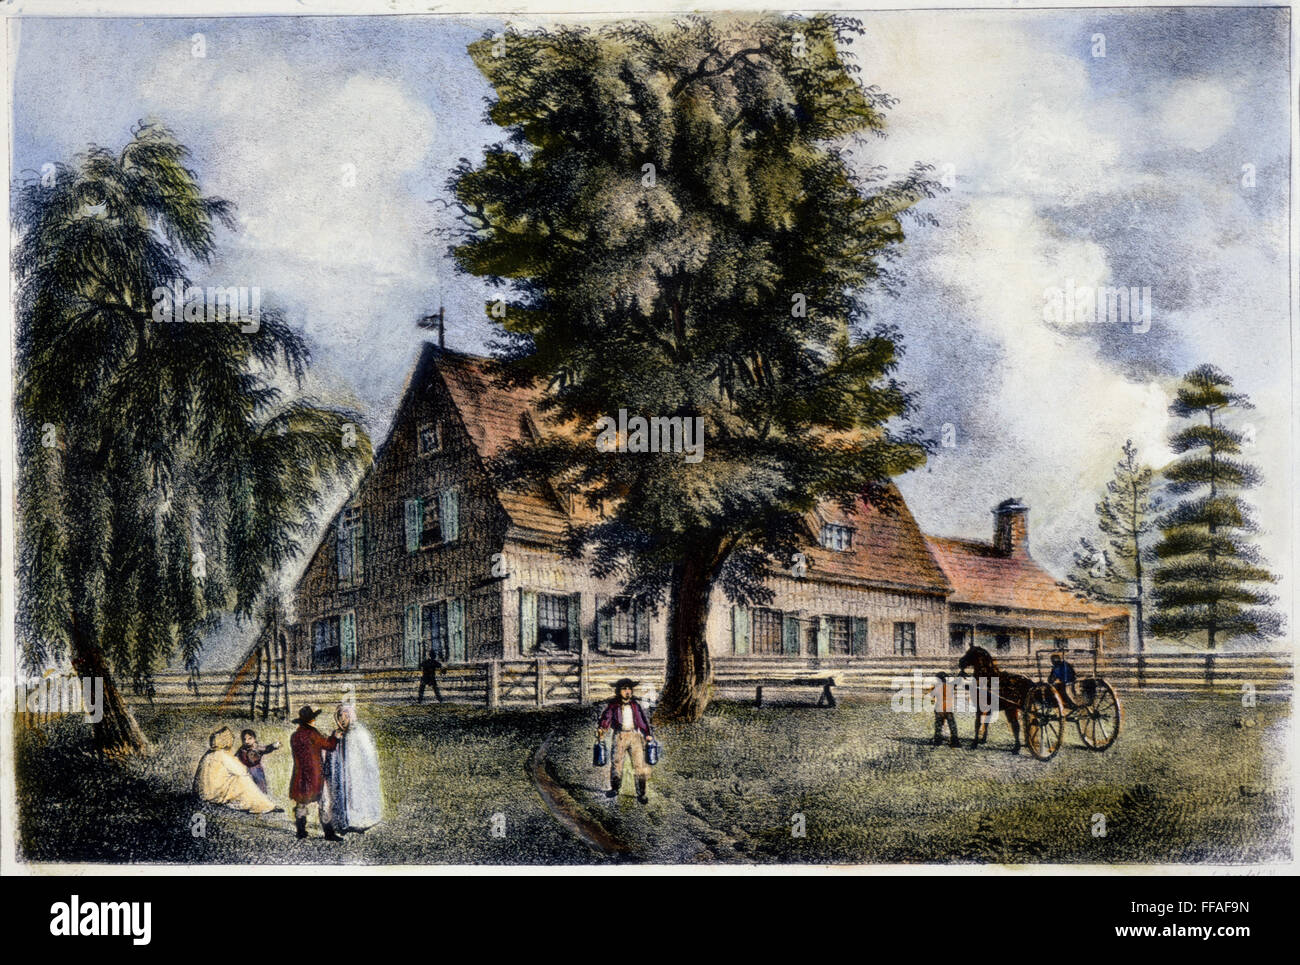 BOWNE HOUSE, 1661./nThe Bowne House, built in 1661 by John Bowne at Flushing, New York, soon becoming a Quaker refuge and meetinghouse in defiance of the ban against Quakers ordered by New Netherlands Governor Peter Stuyvesant: American lithograph, c1819. Stock Photo